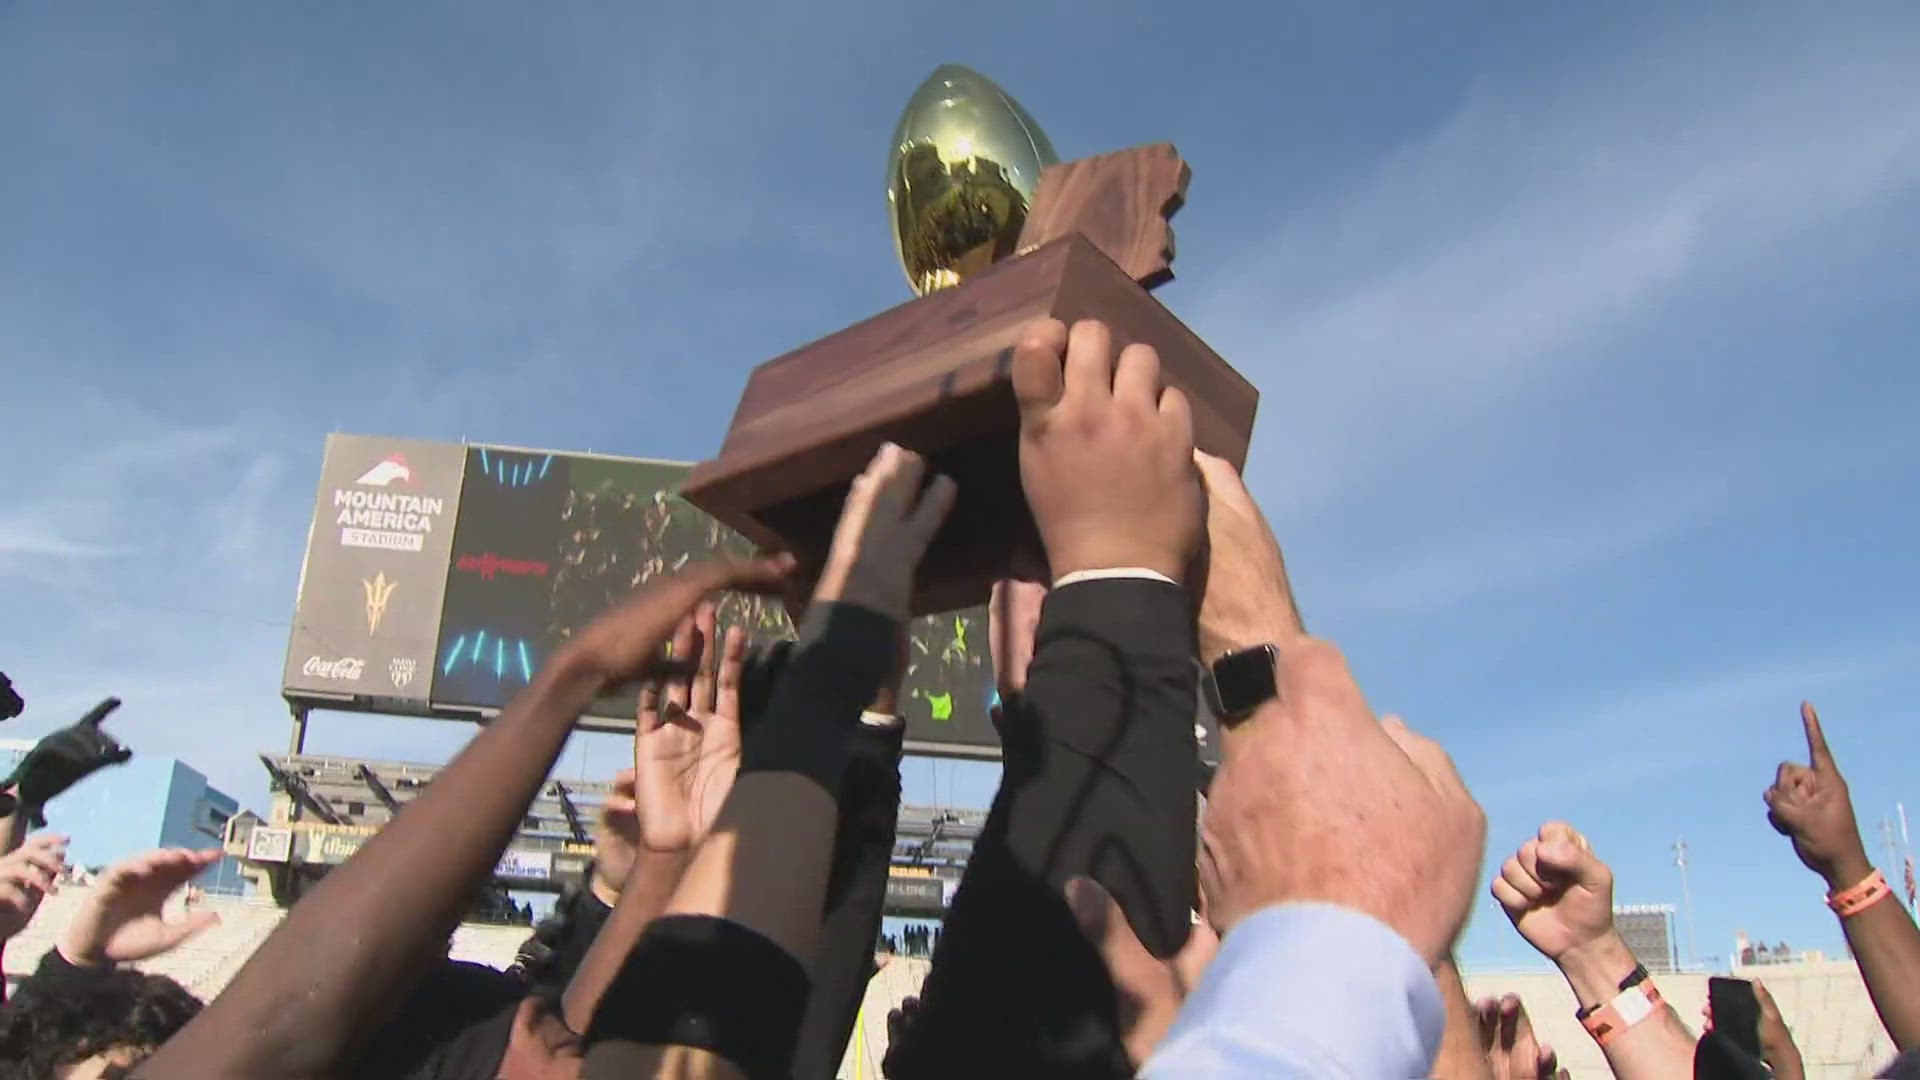 The Saguaro Sabercats won the 14th state title in school history by beating Red Mountain 40-20 in the 6A title game! Here are the highlights and postgame reaction